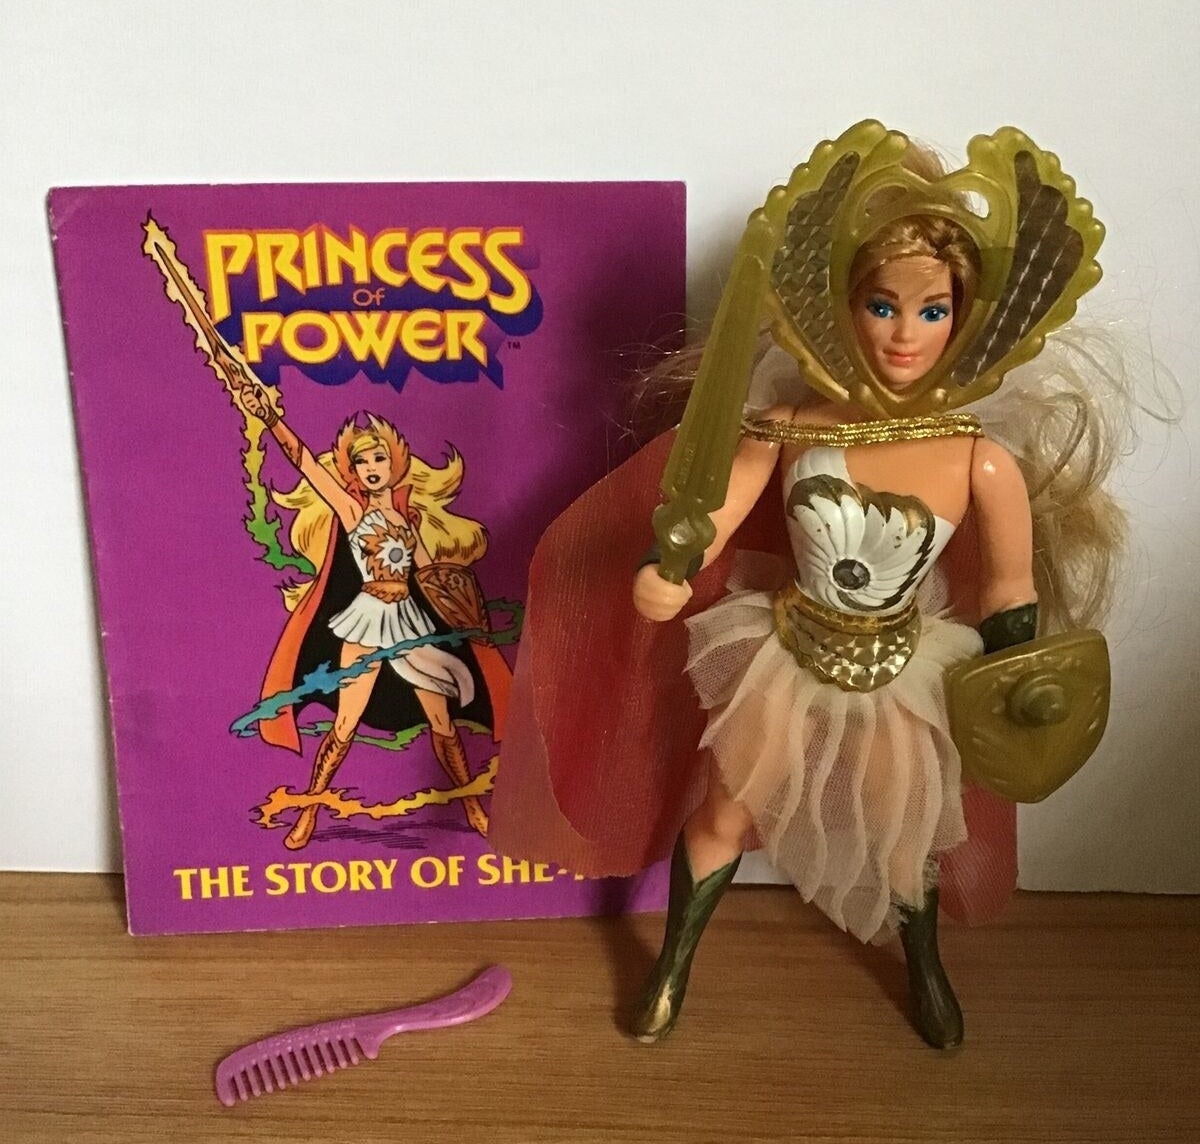 A She-Ra action figure holding her sword and shield standing next to a purple She-Ra comic  